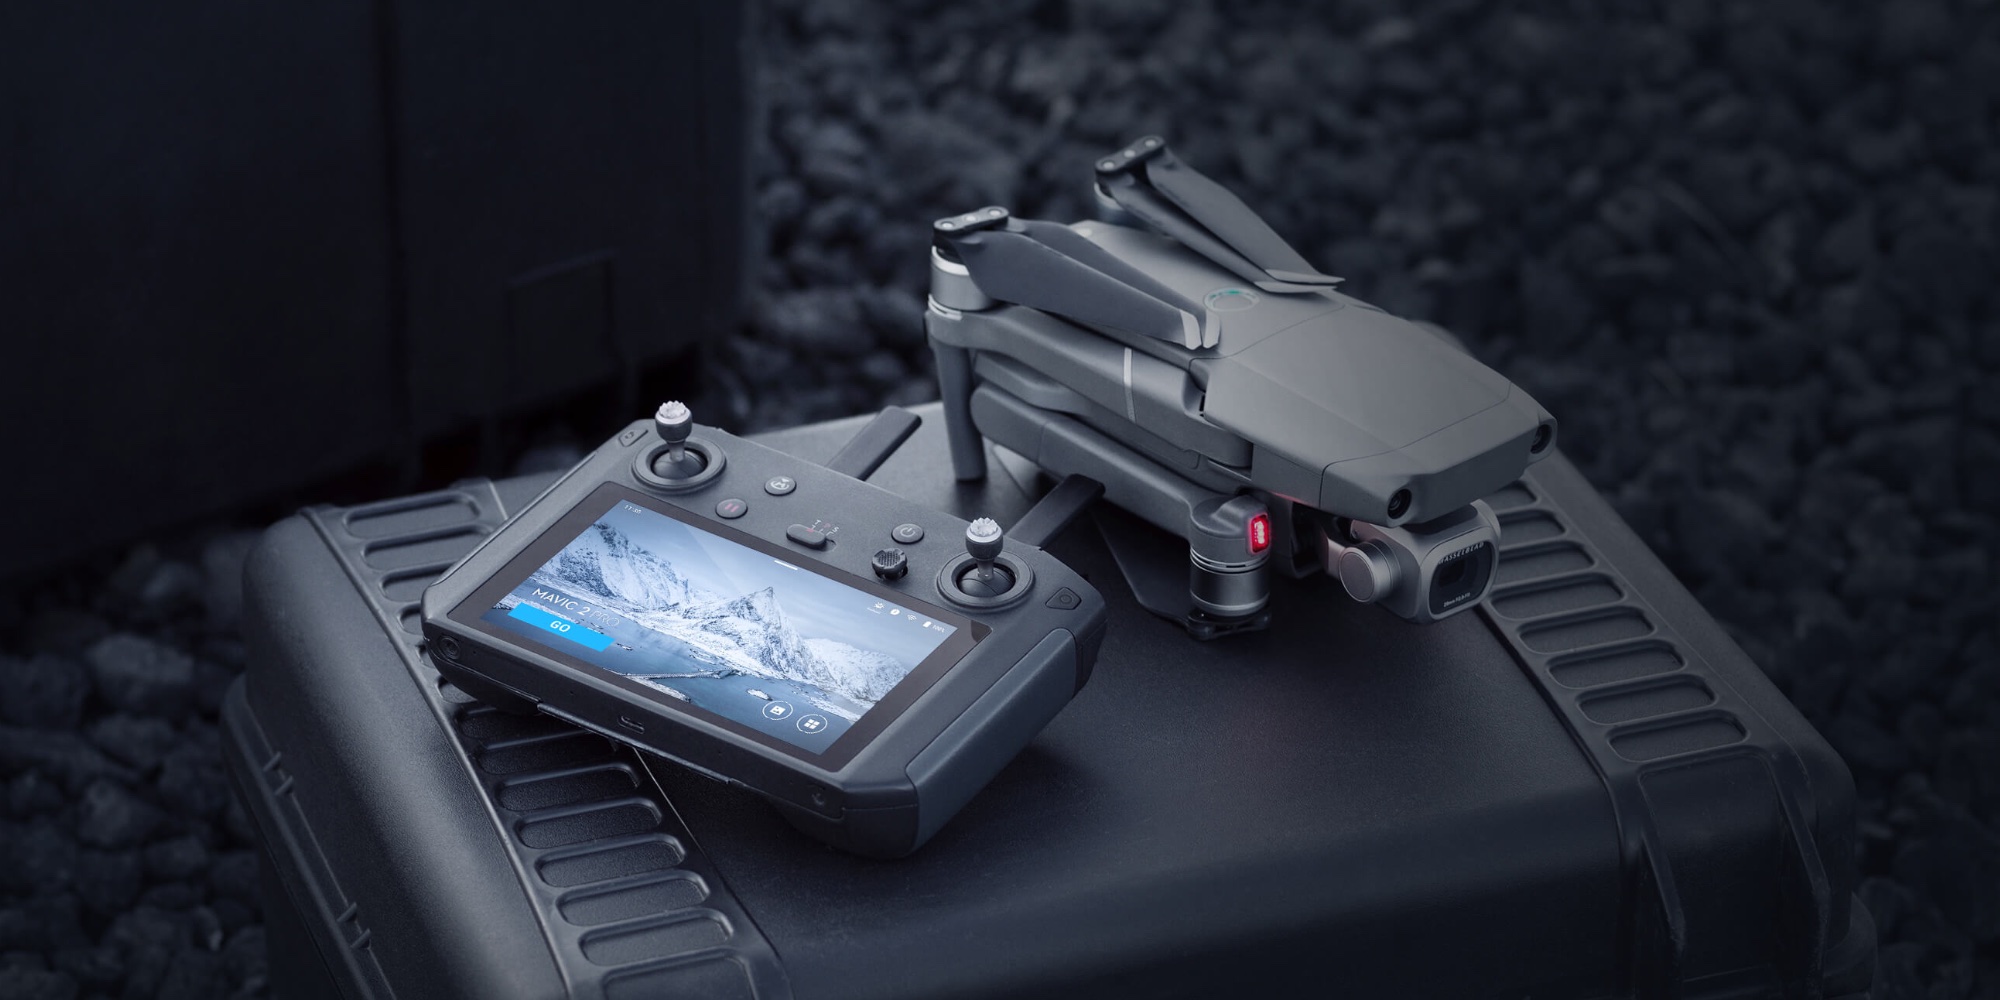 DJI Mavic Air 2 Fly More Combo includes a Smart Controller for 